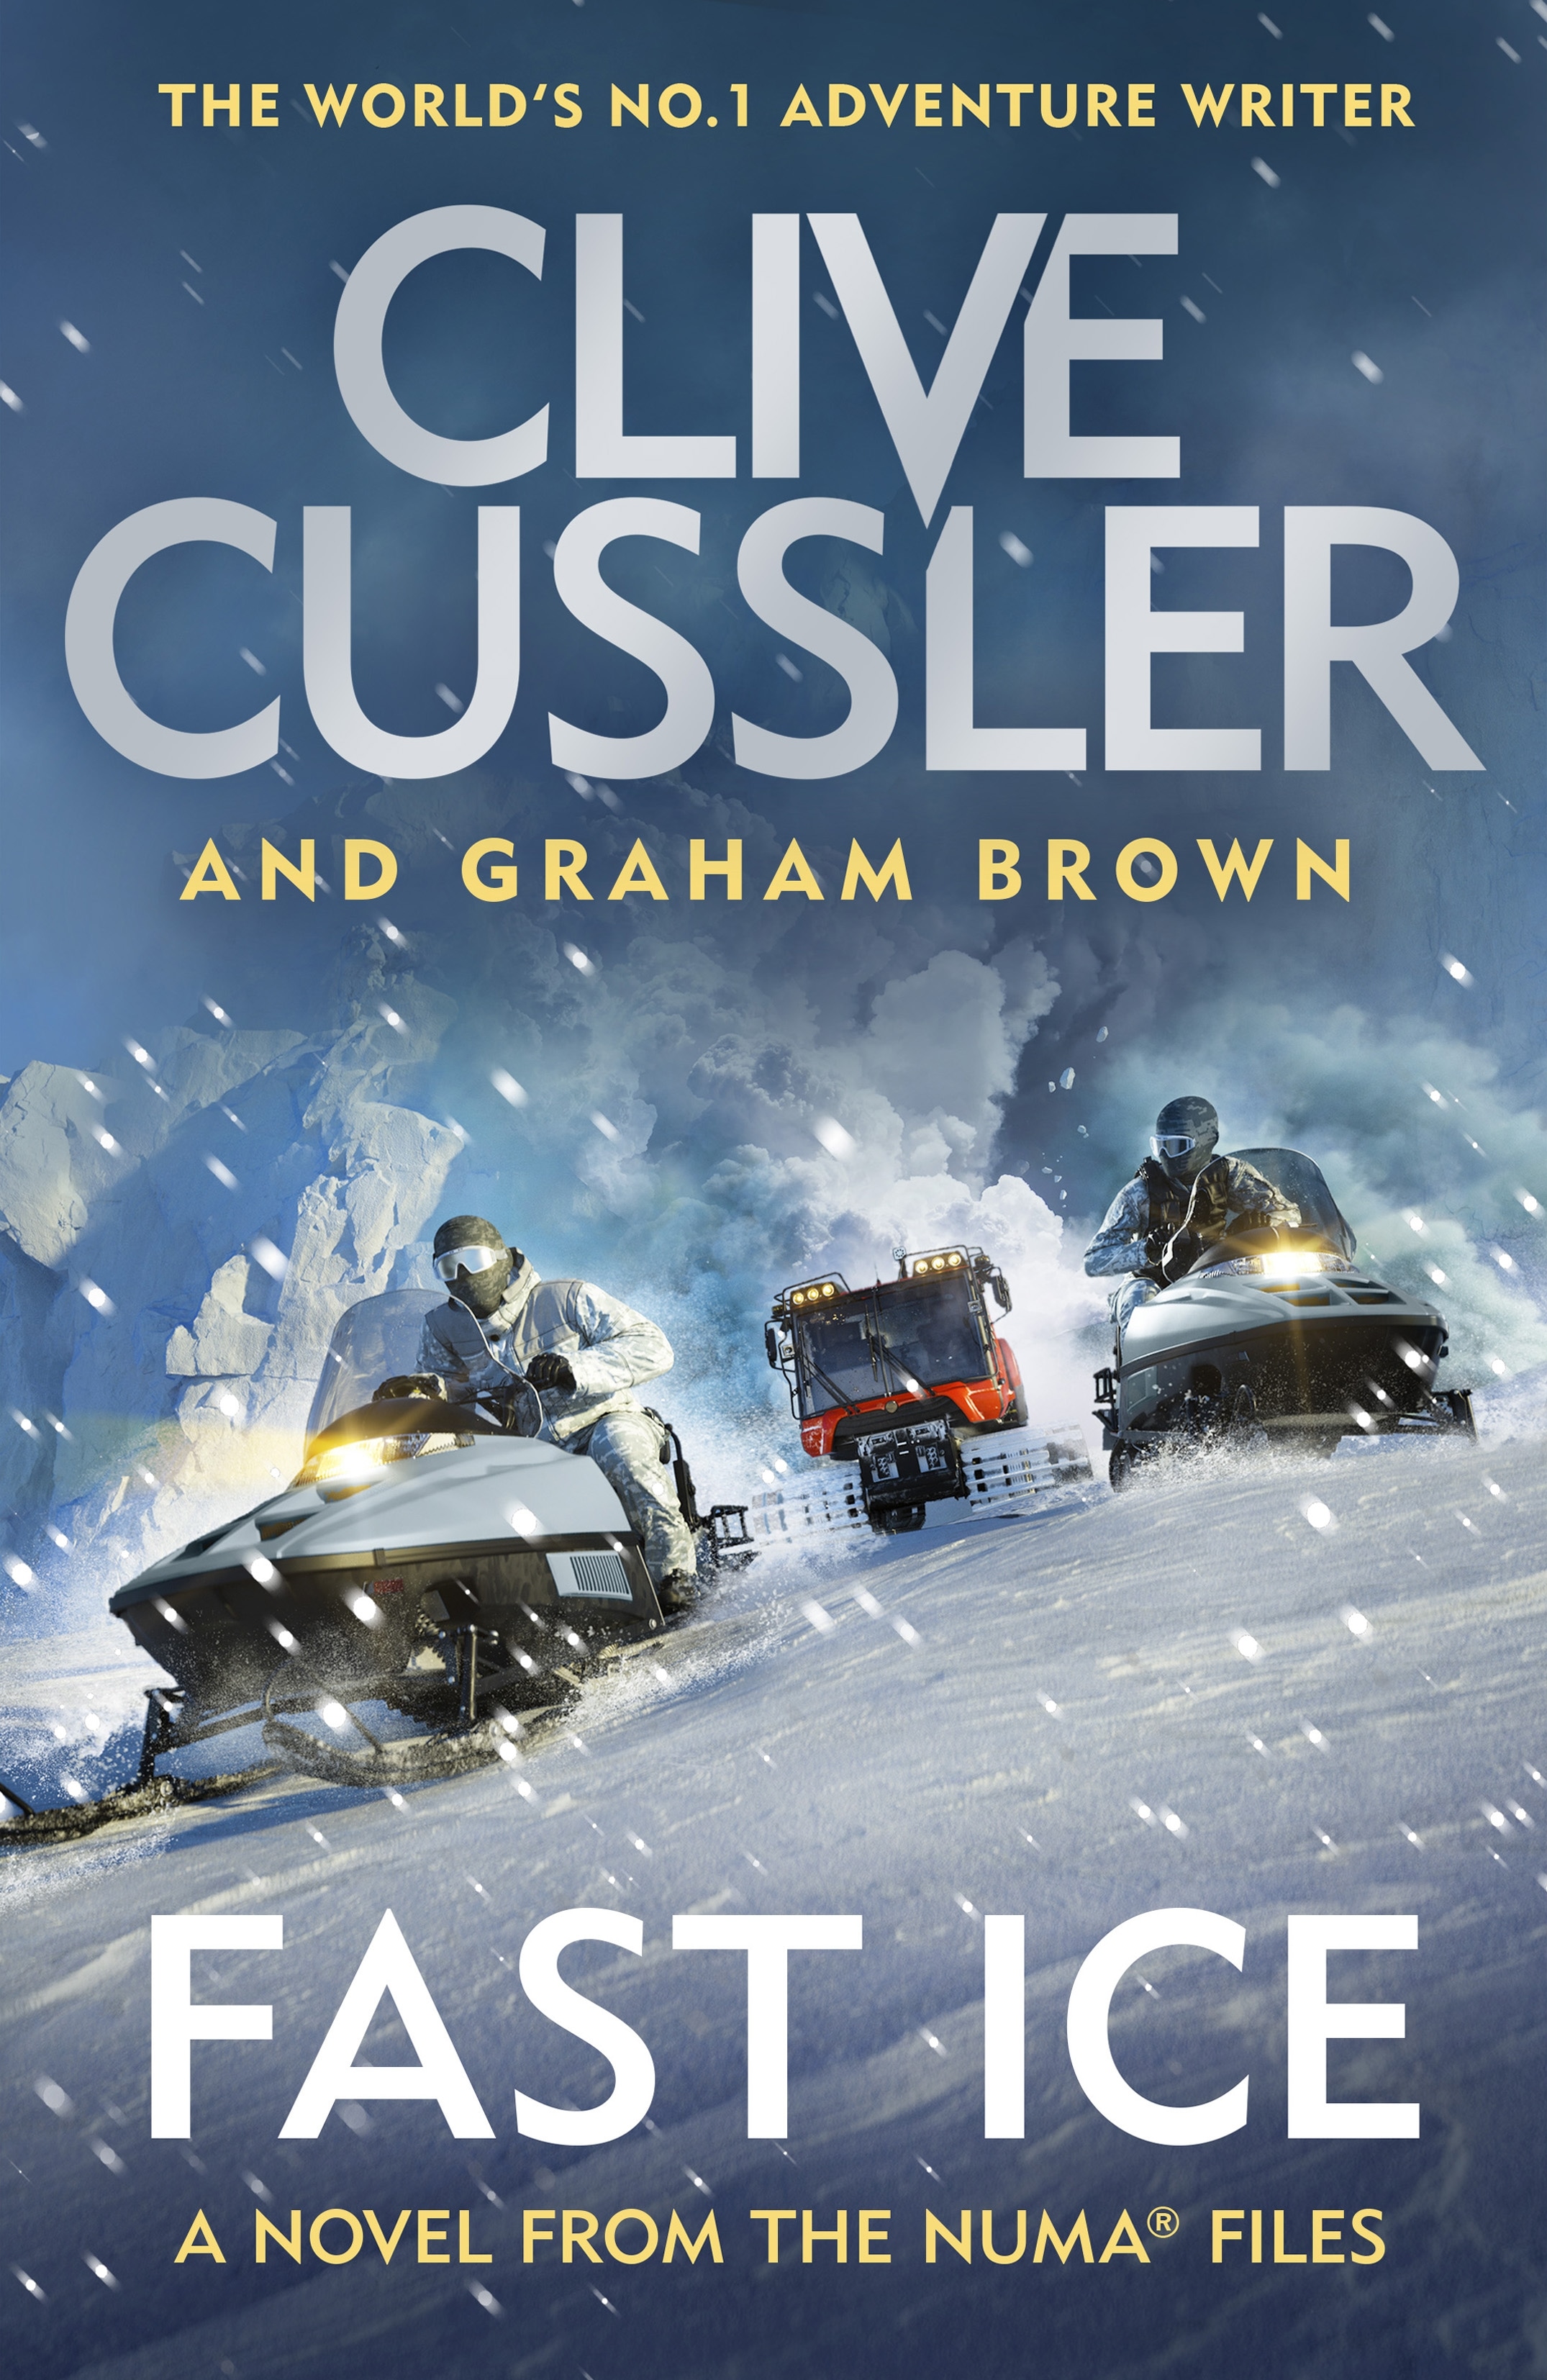 Book “Fast Ice” by Clive Cussler, Graham Brown — March 18, 2021